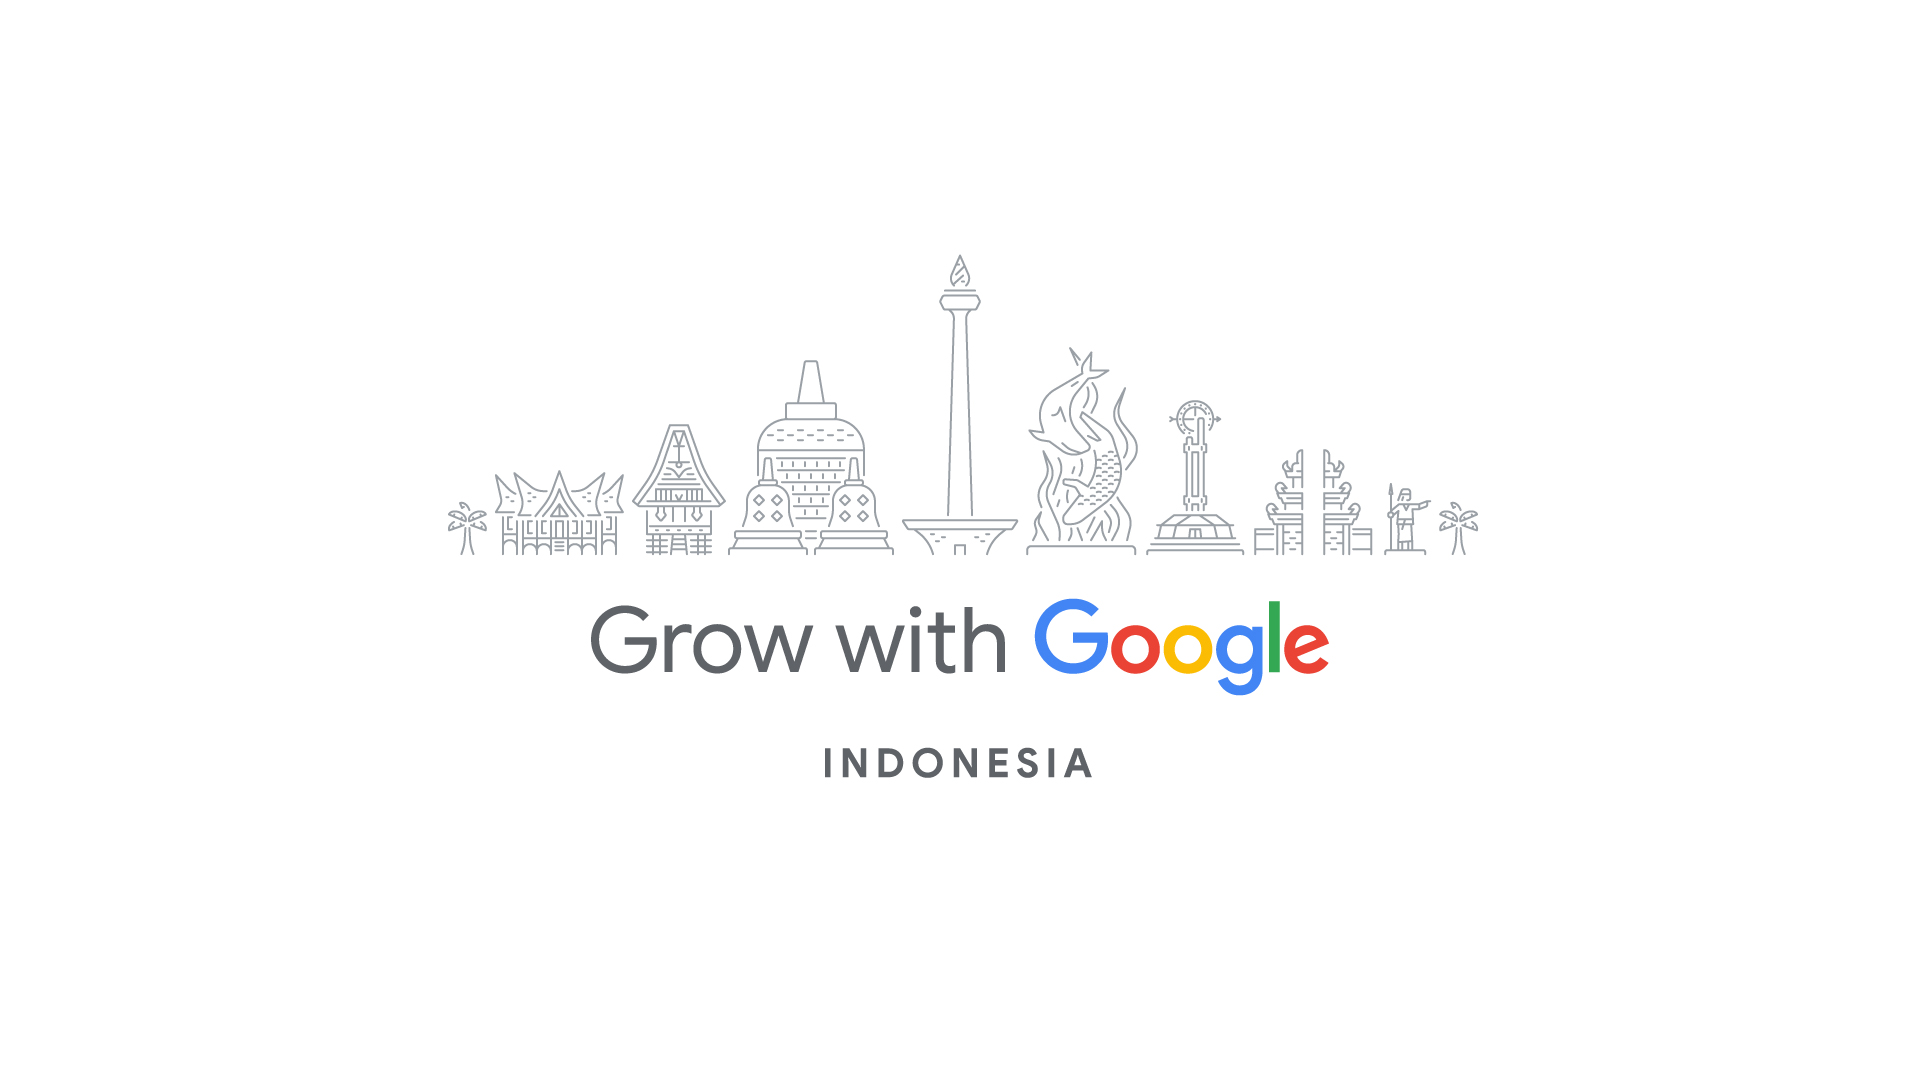 [Picture] Grow with Google Indonesia